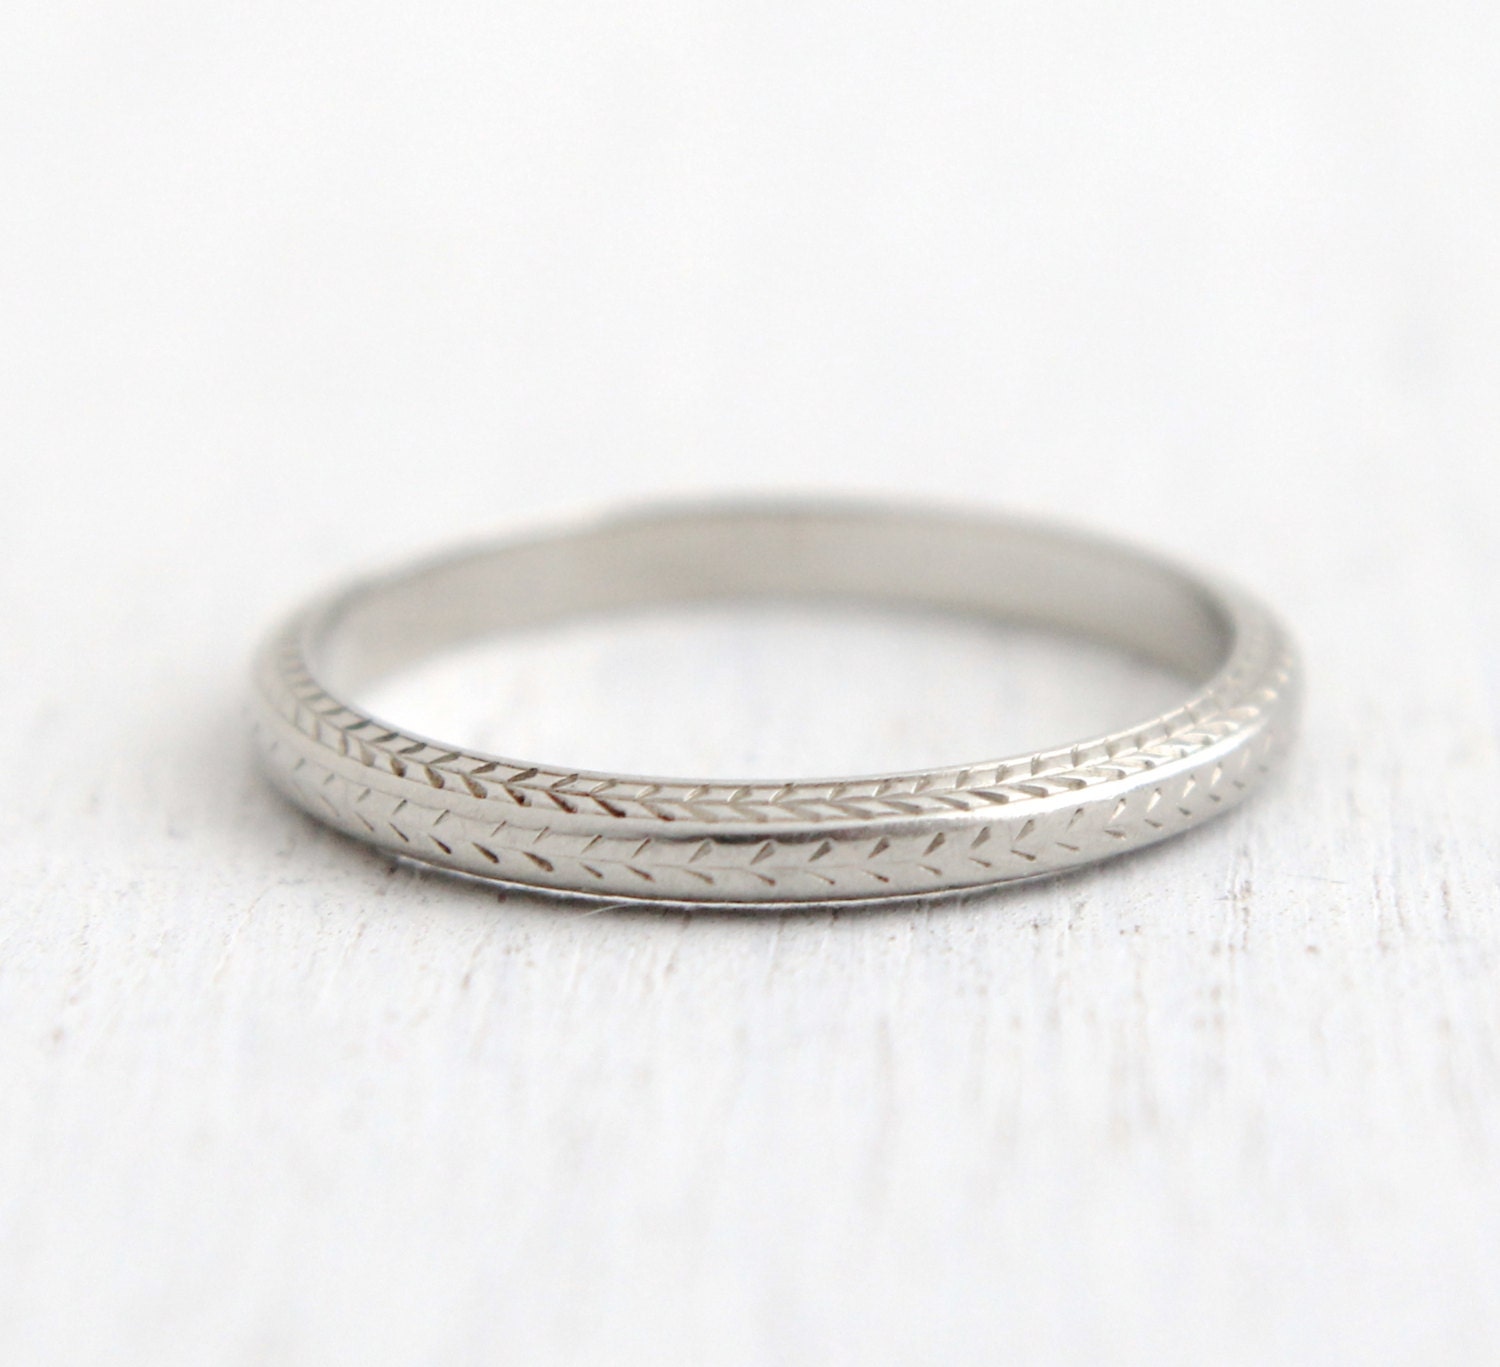 Antique 18k White Gold Wedding Band Ring Belais by MaejeanVintage